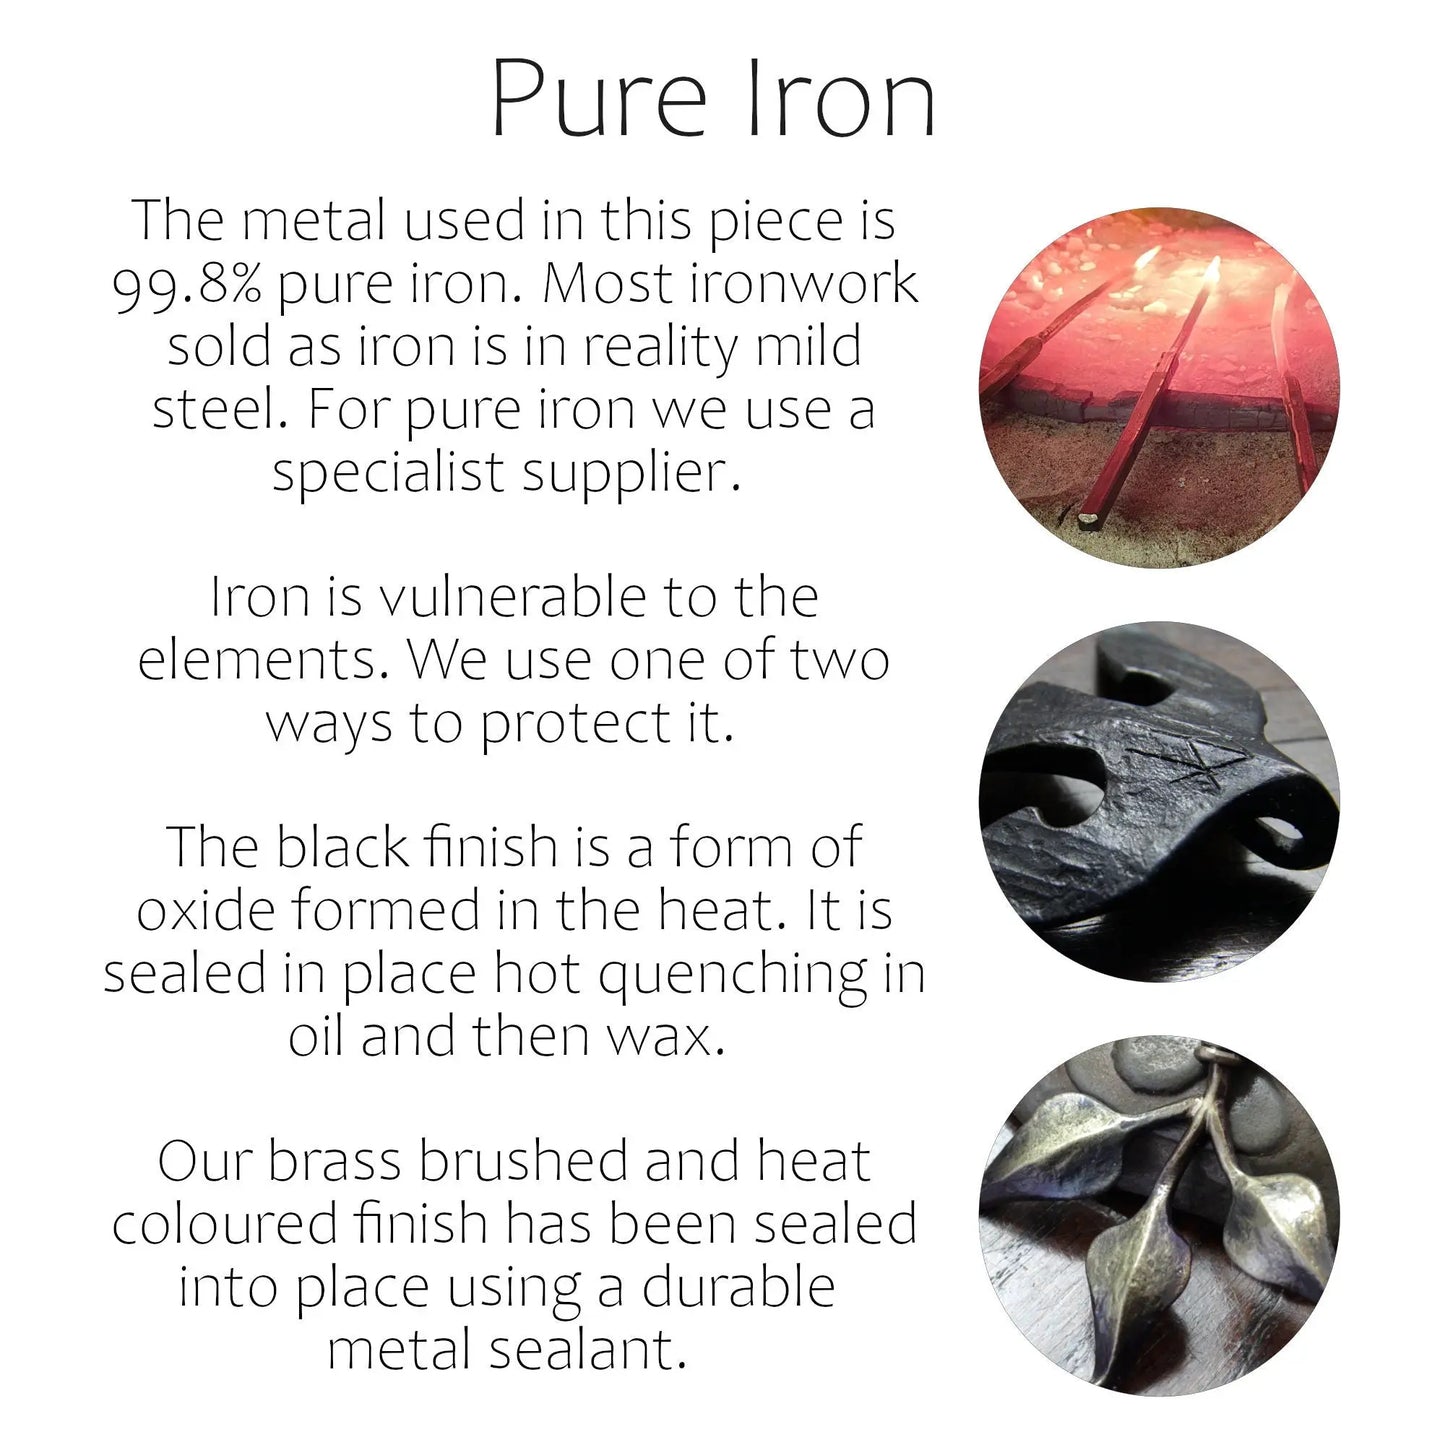 Information on Taitaya Forge Pure iron. The metal used in this piece is 99.8% pure iron. Most ironwork sold as iron is in reality mild steel. For pure iron we use a specialist supplier. Iron is vulnerable to the elements. We use one of two ways to protect it. The black finish is a form of oxide formed in the heat. It is sealed in place hot quenching in oil and then wax. Our brass brushed and heat coloured finish has been sealed into place using a durable metal sealant. 